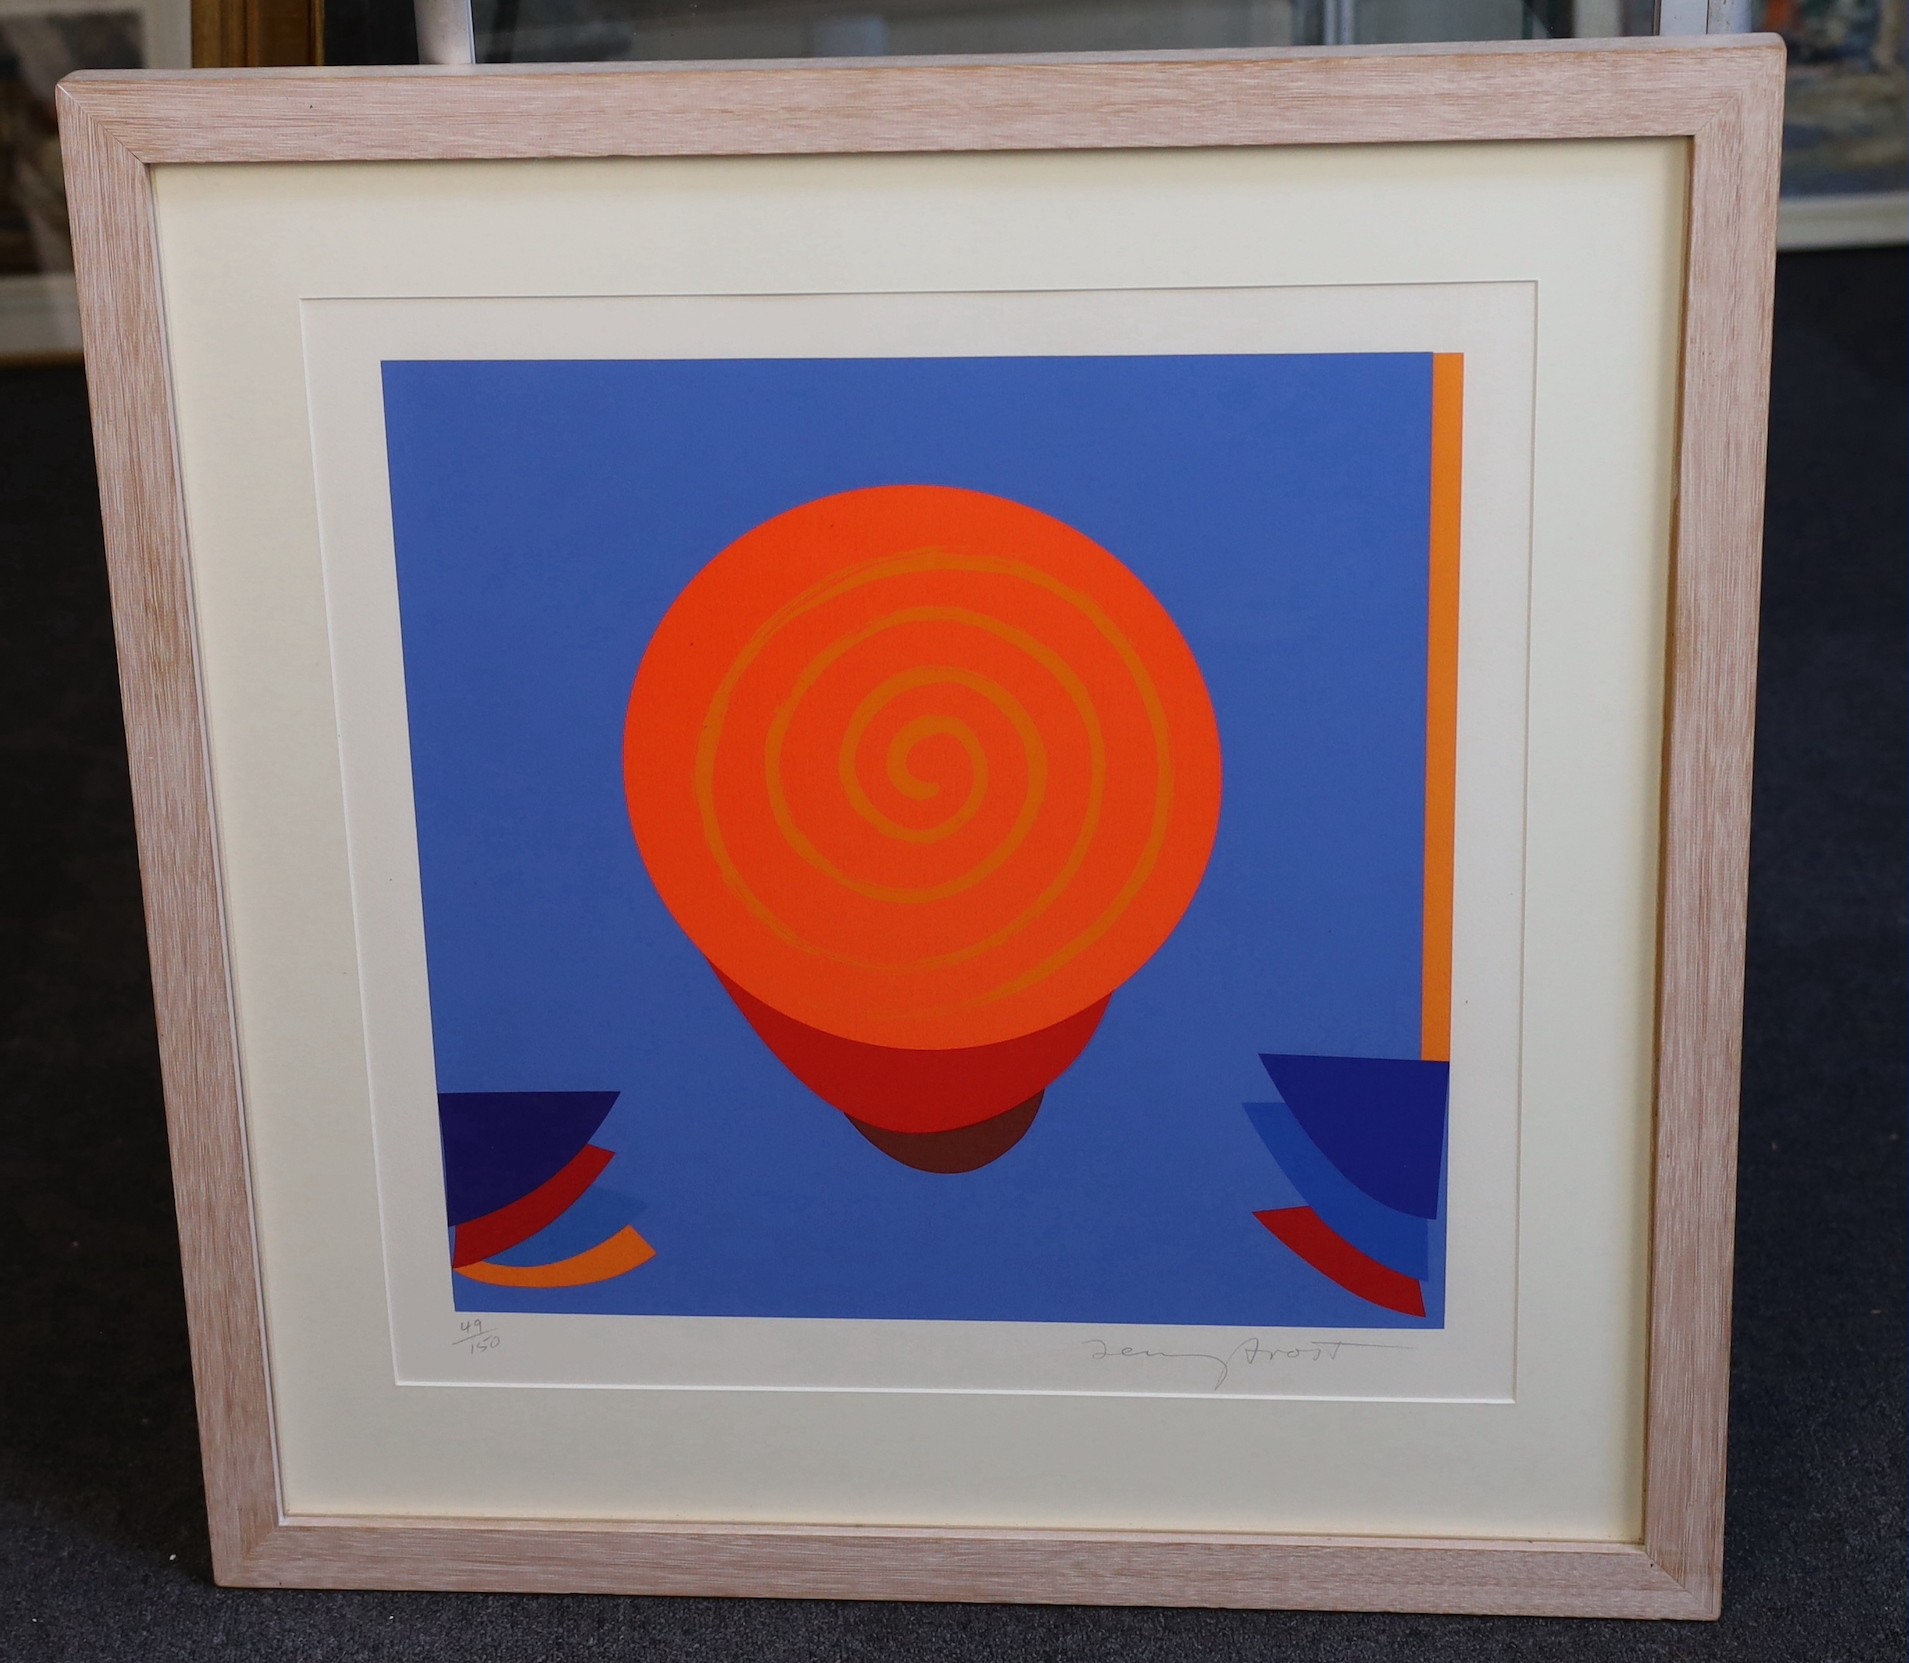 Sir Terry Frost, R.A. (British, 1915-2003), 'Orange and Blue Space 1998' (Kemp 182), screenprint in colours, 48 x 48.5cm